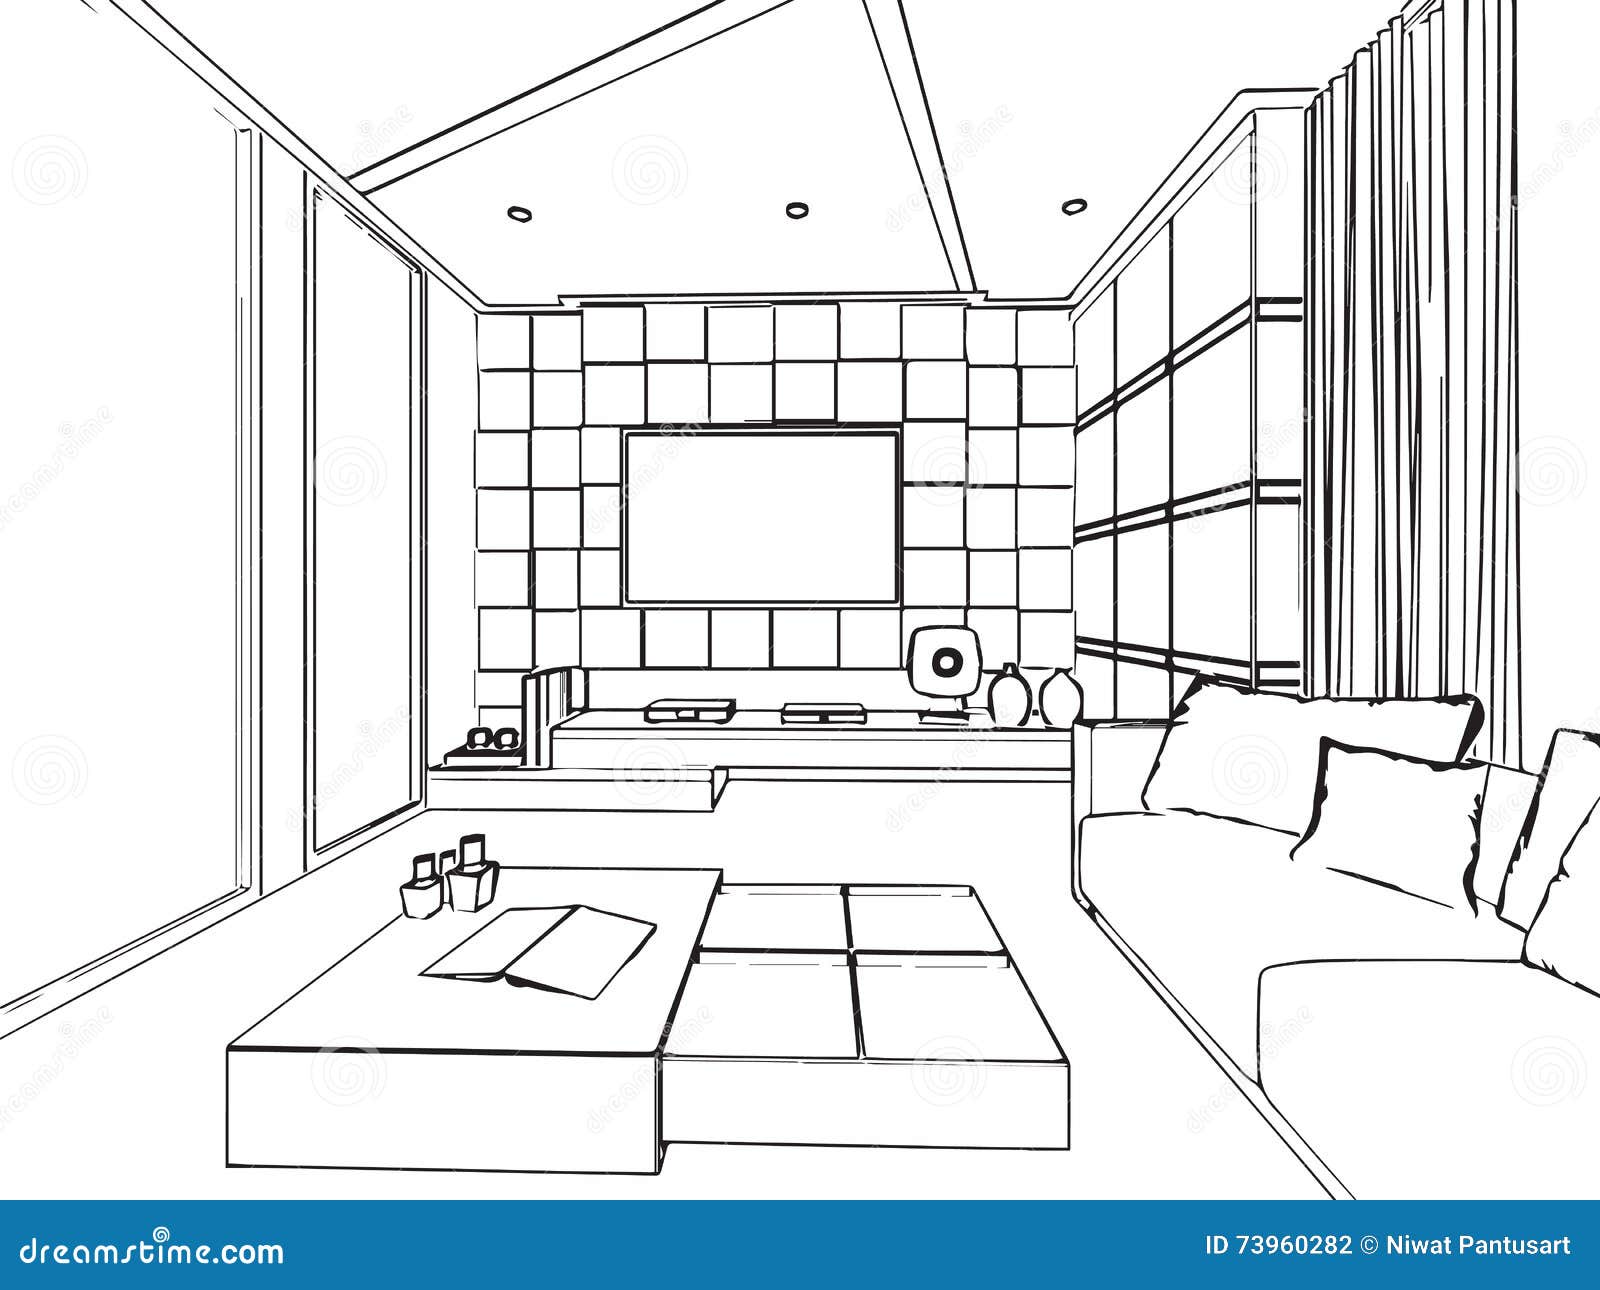 Outline Sketch Drawing Interior Perspective Of House Stock Illustration   Download Image Now  iStock